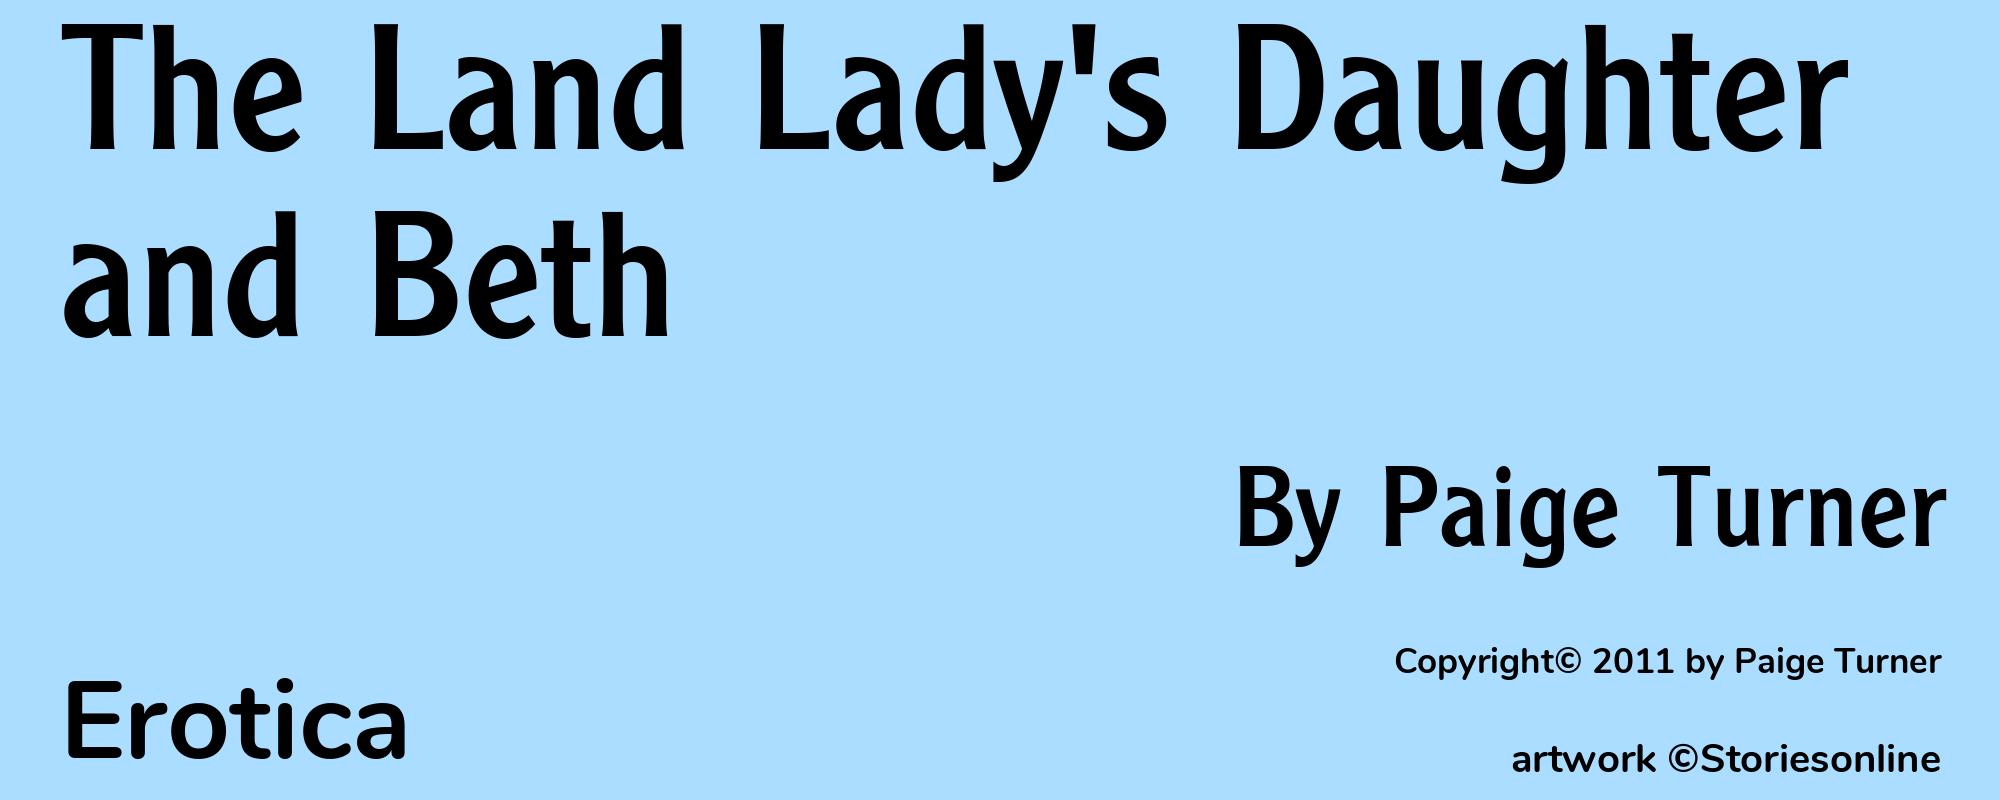 The Land Lady's Daughter and Beth - Cover